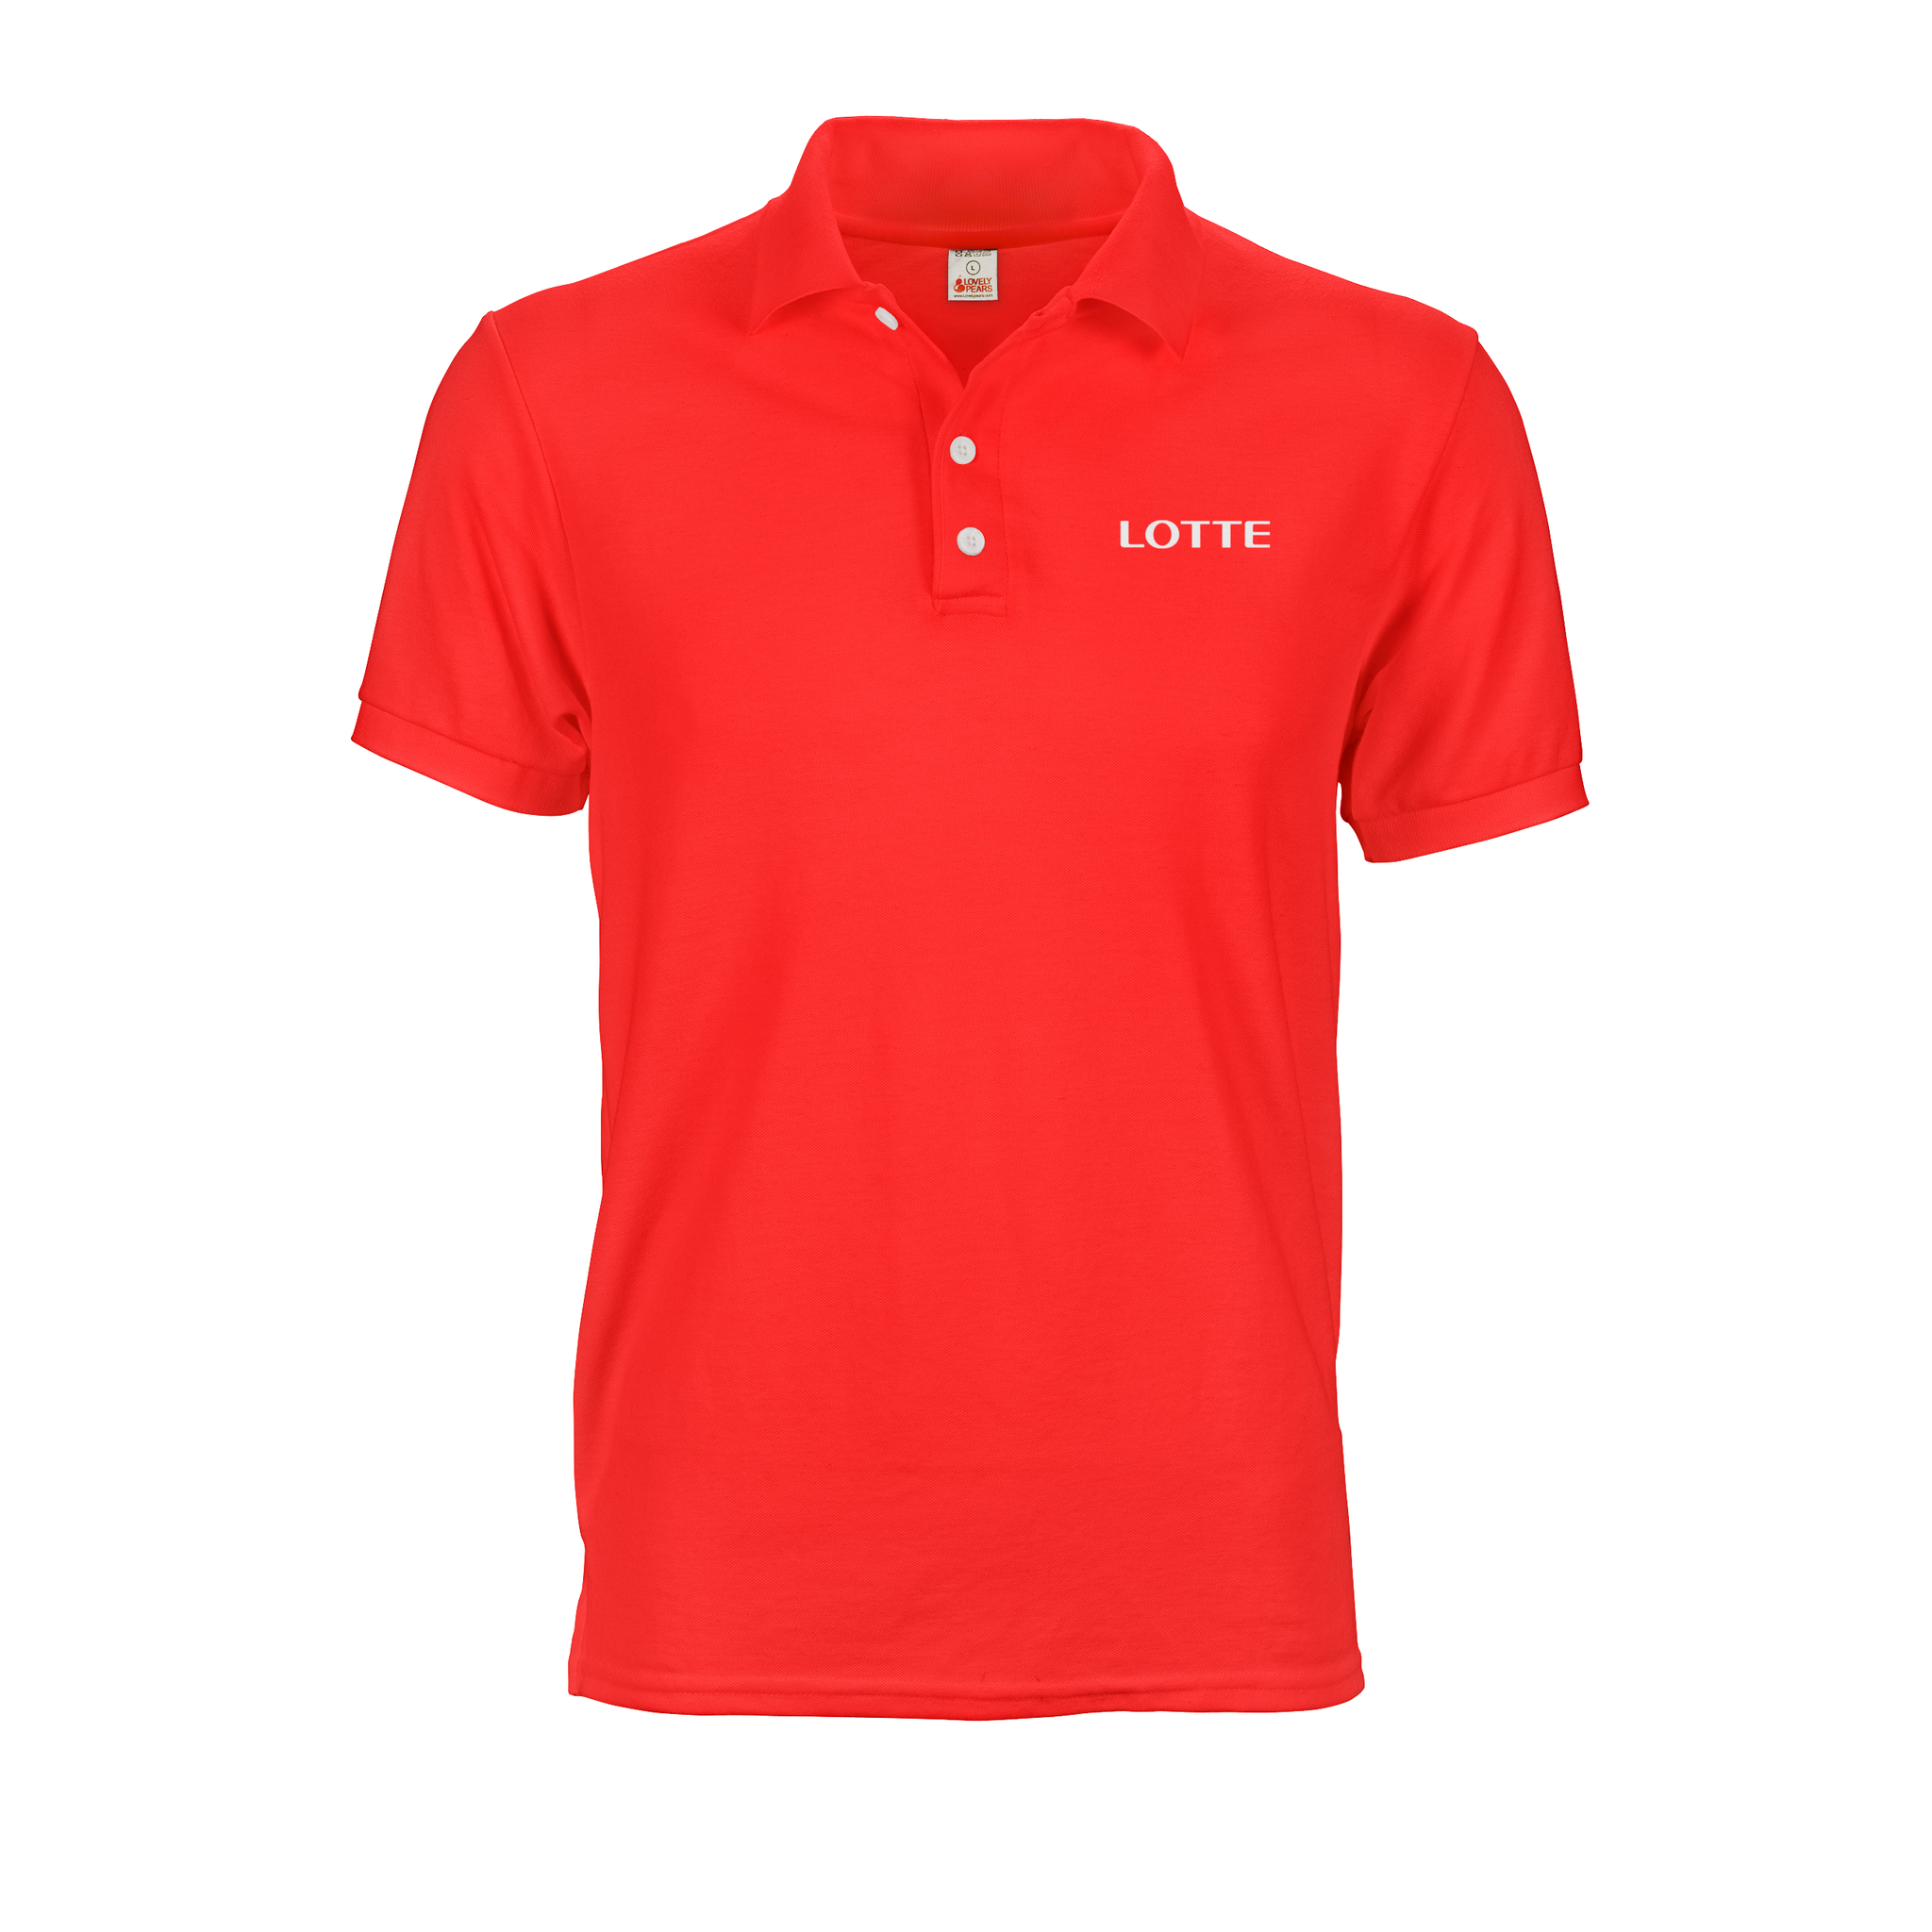 Red polo tee shirt with Lotte A6 logo print